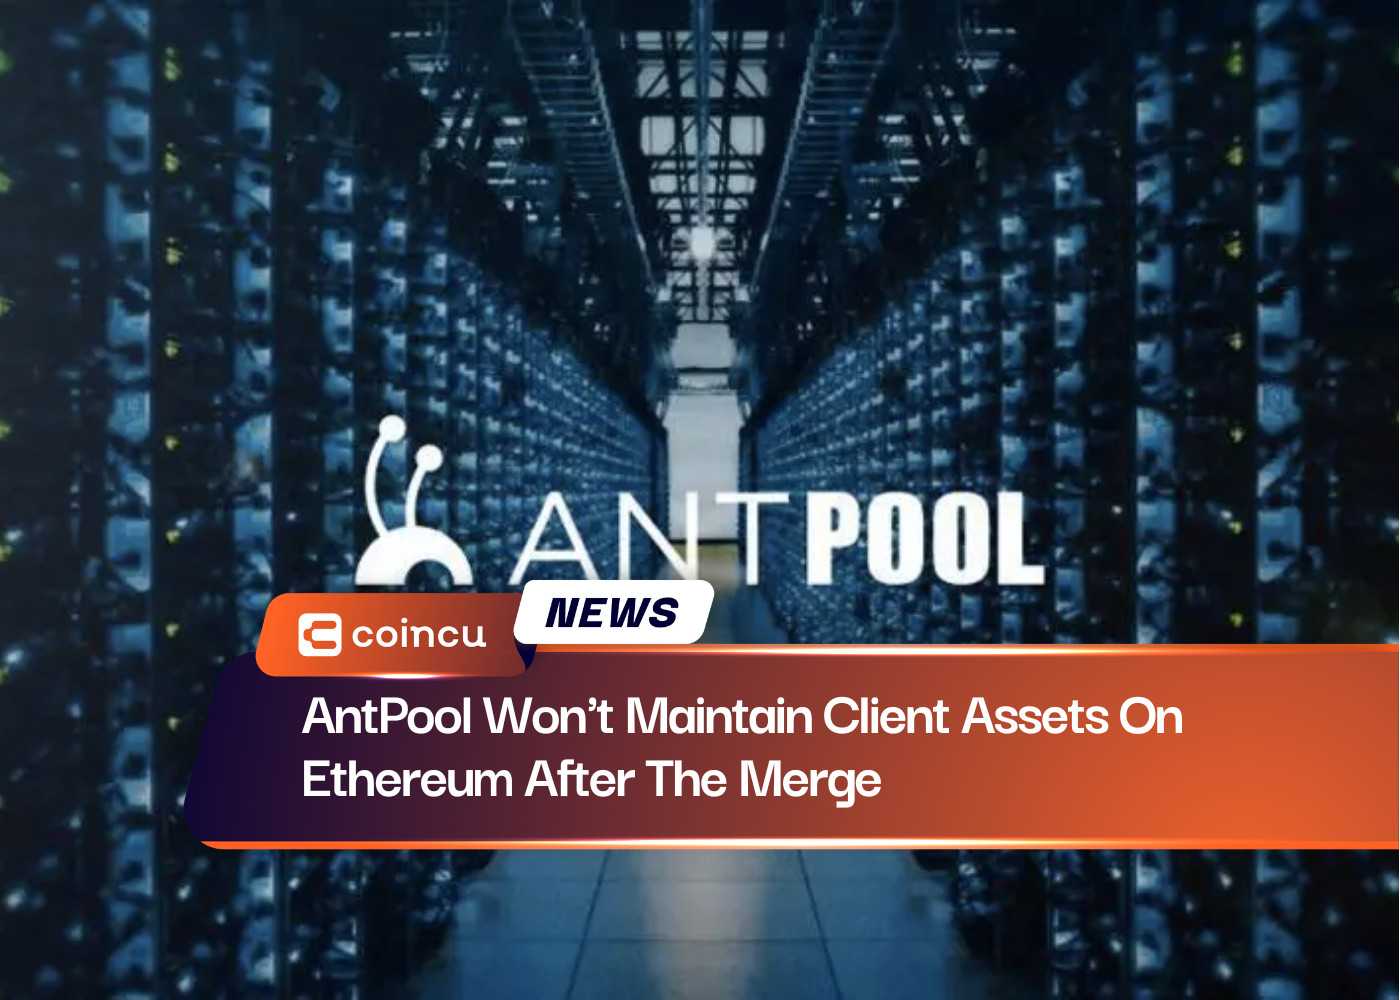 AntPool Won't Maintain Client Assets On Ethereum After The Merge